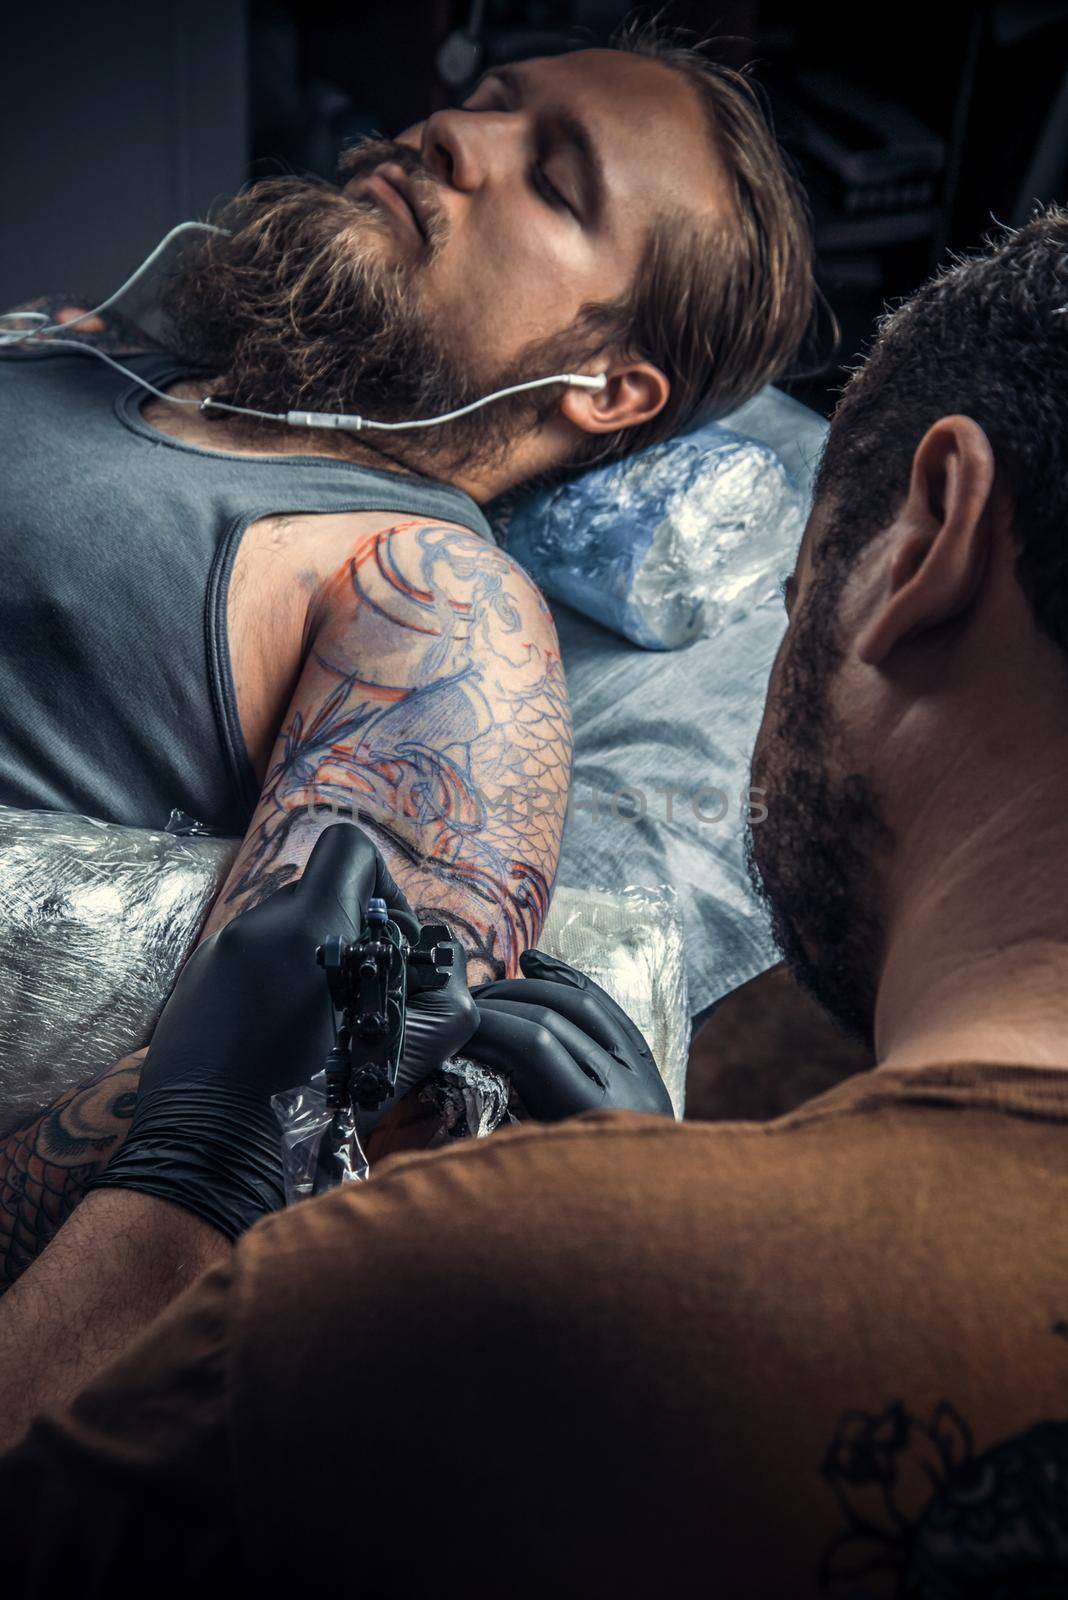 Professional tattoo artist showing process of making a tattoo in tattoo parlor by Proff